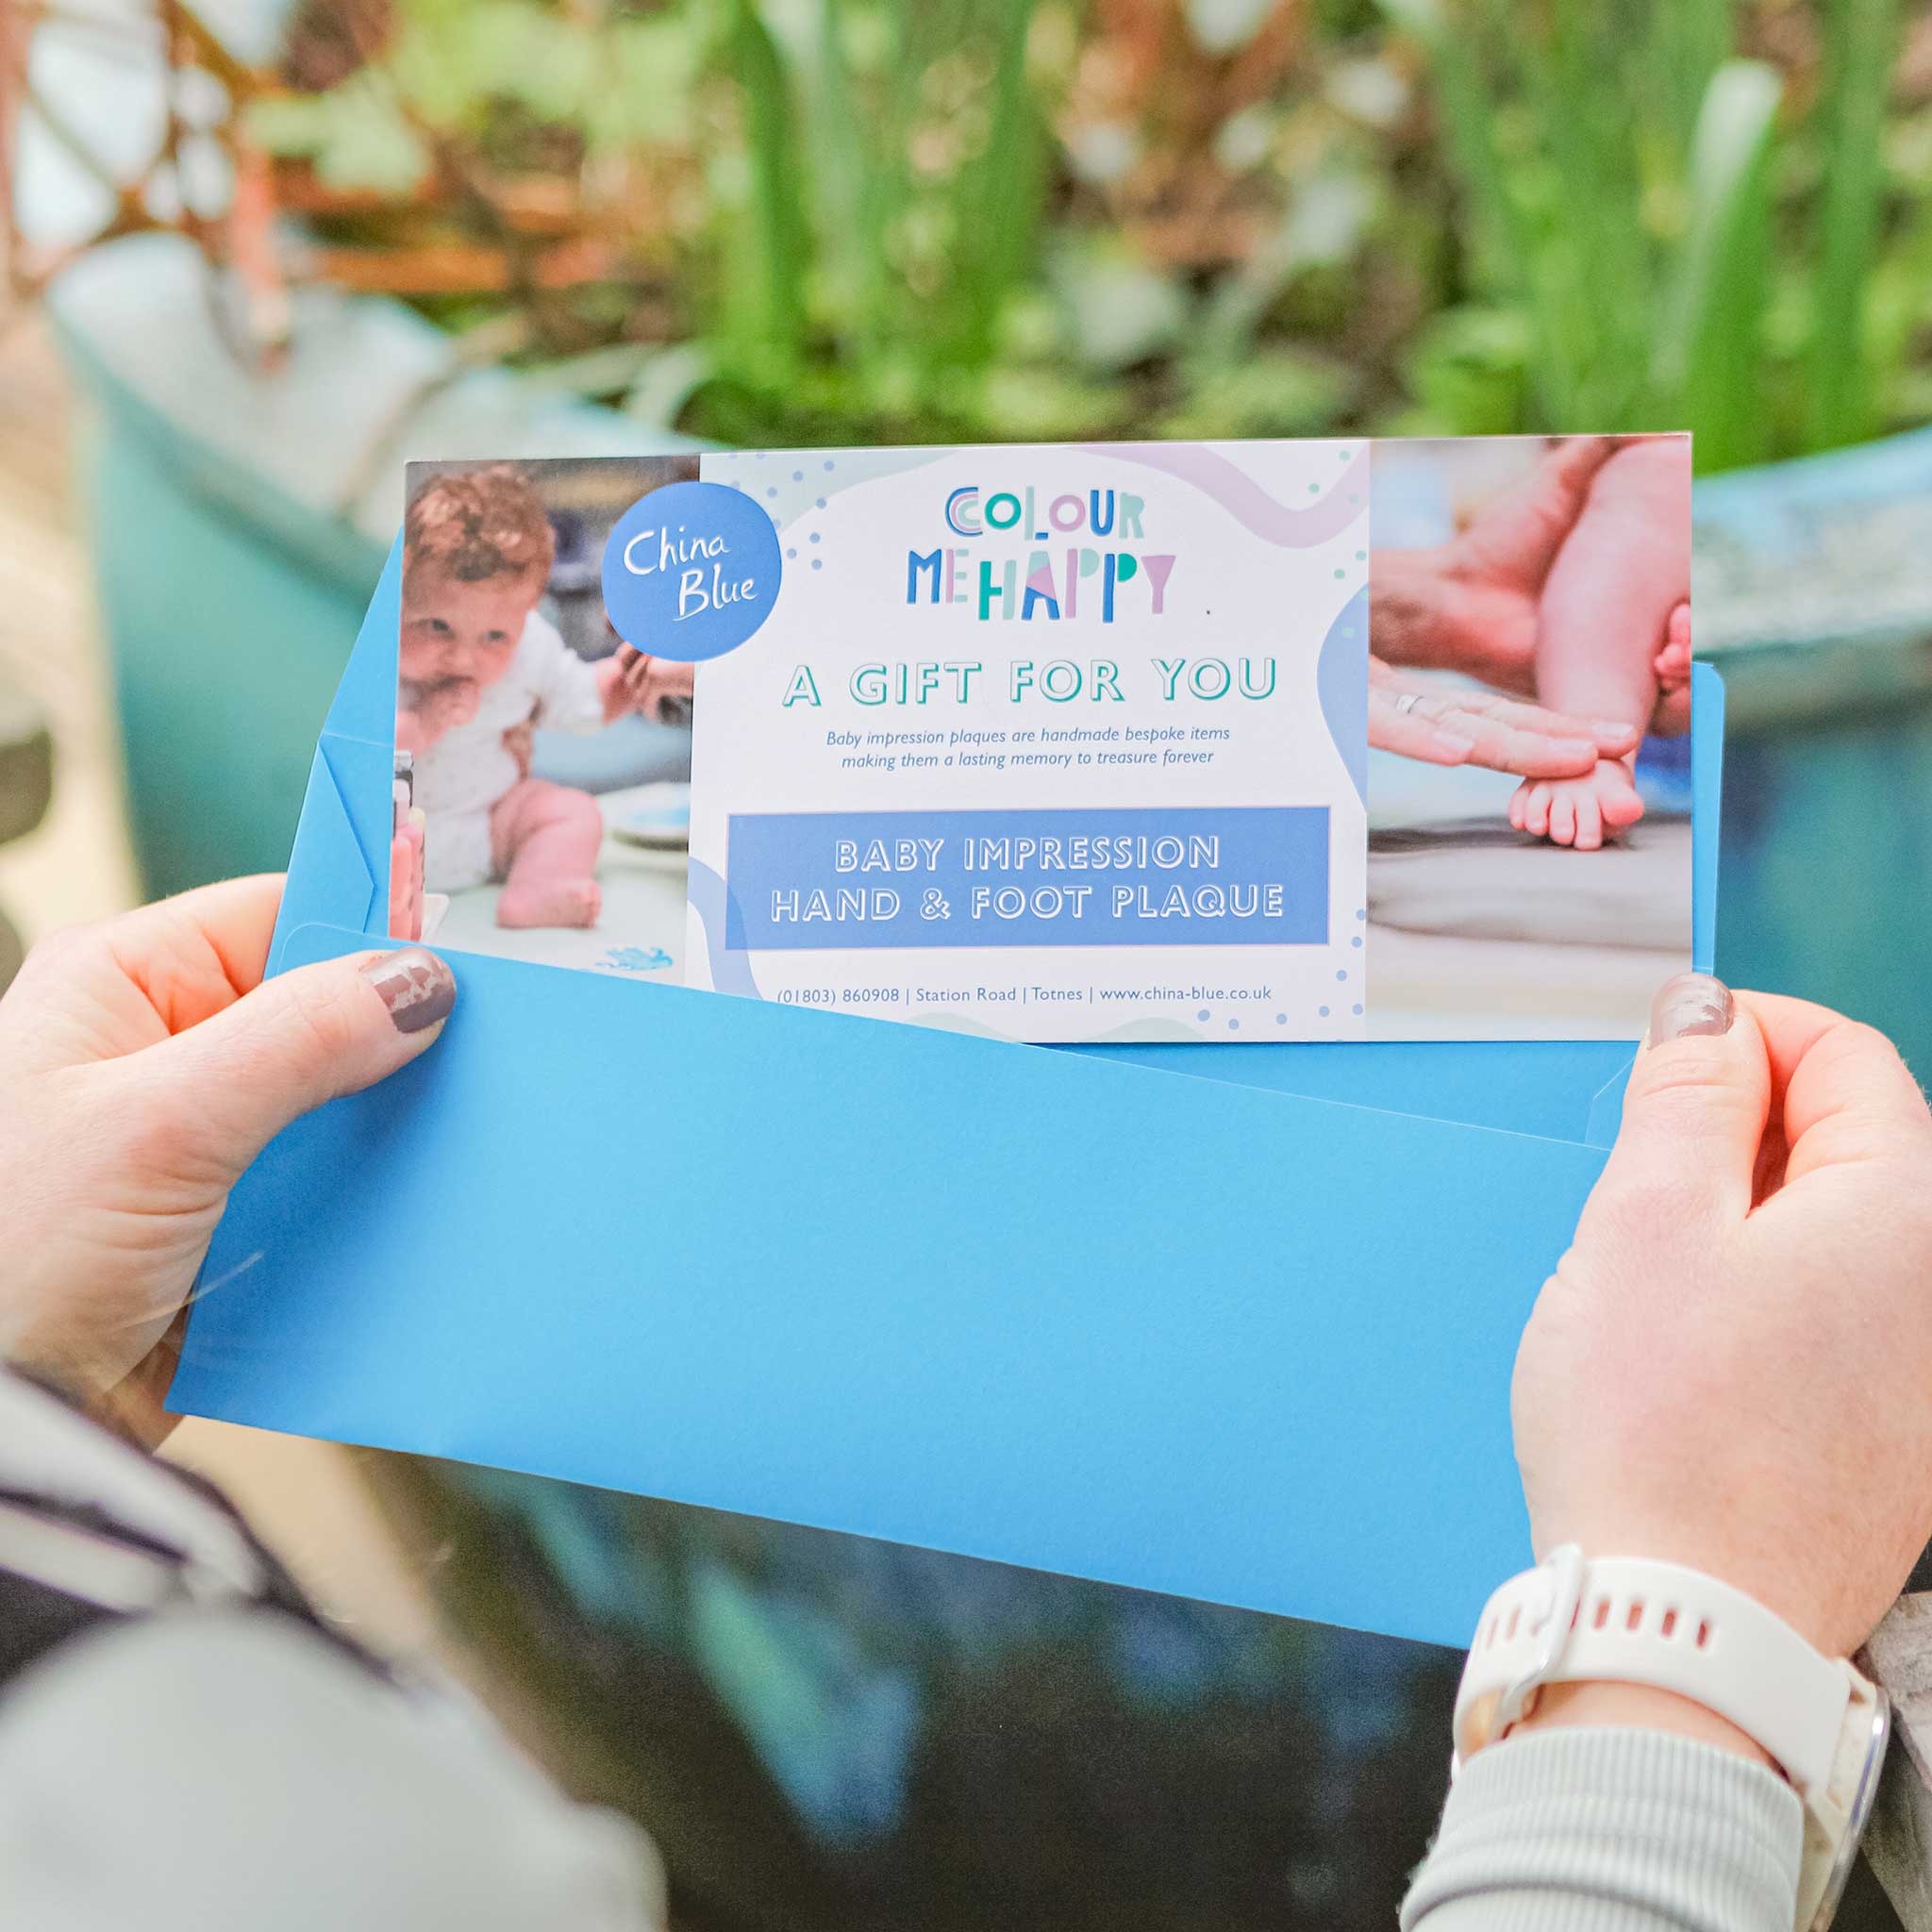 Square Hand and Foot Plaque Voucher from China Blue